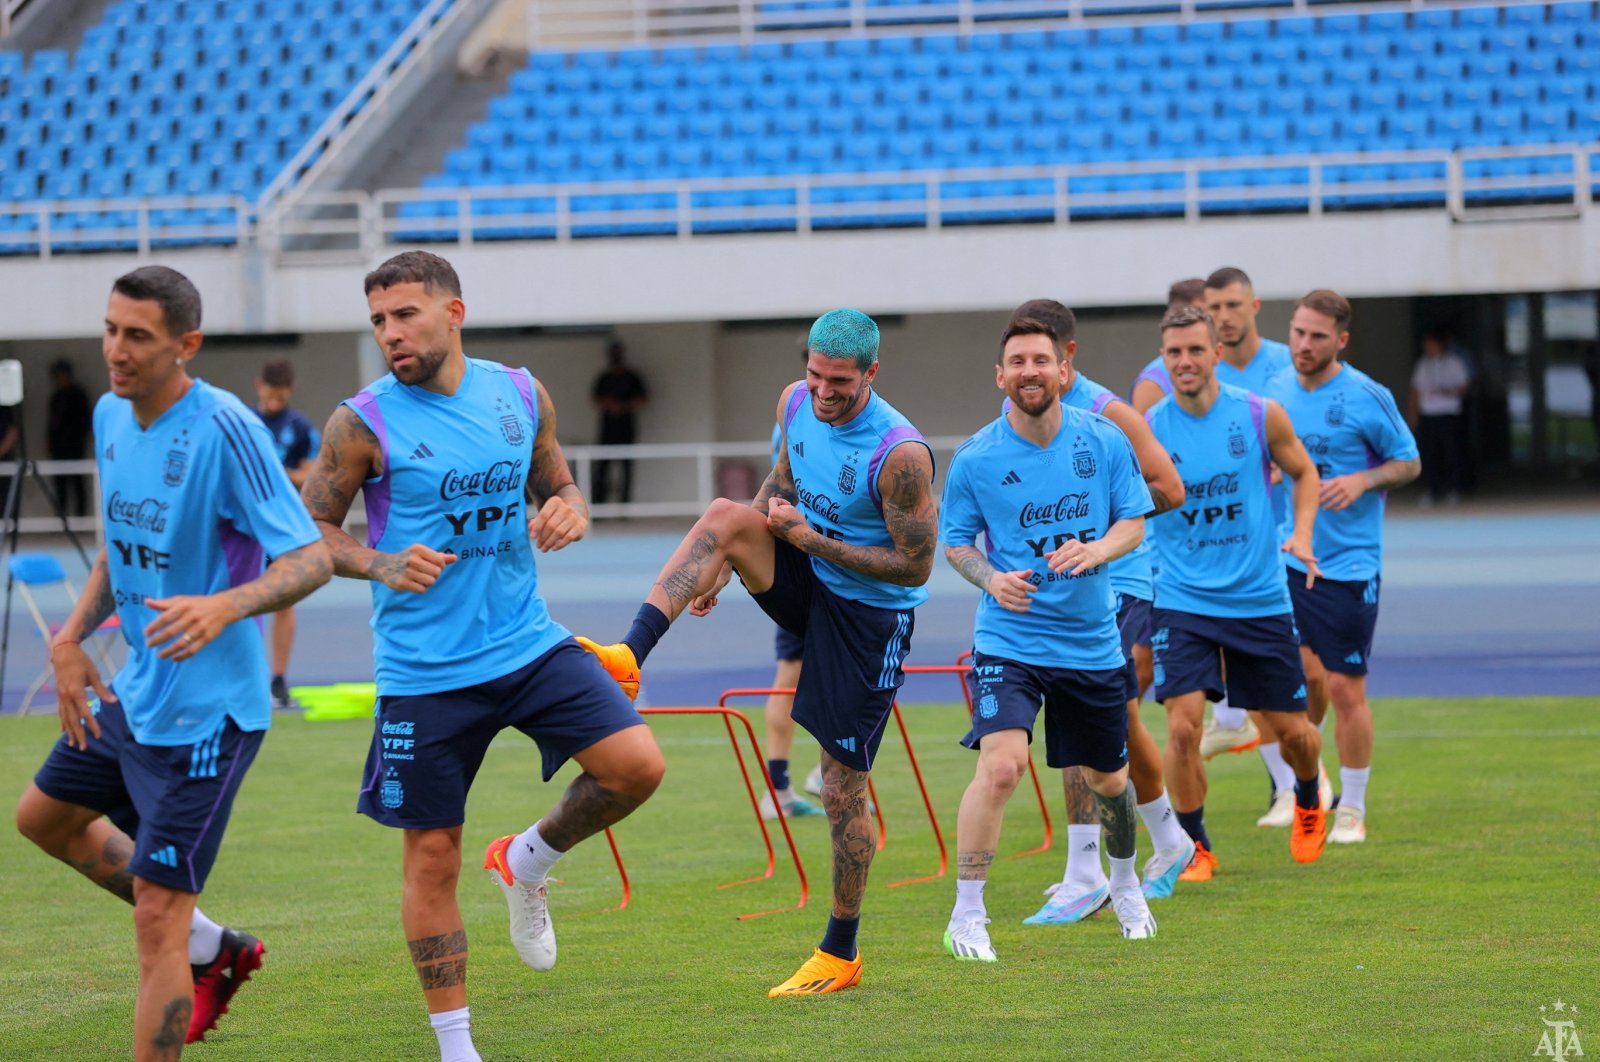 Argentina national team players during training ahead of the international friendly match against Australia at the Beijing Olympic Stadium, Beijing, China, June 12, 2023. (Reuters Photo)